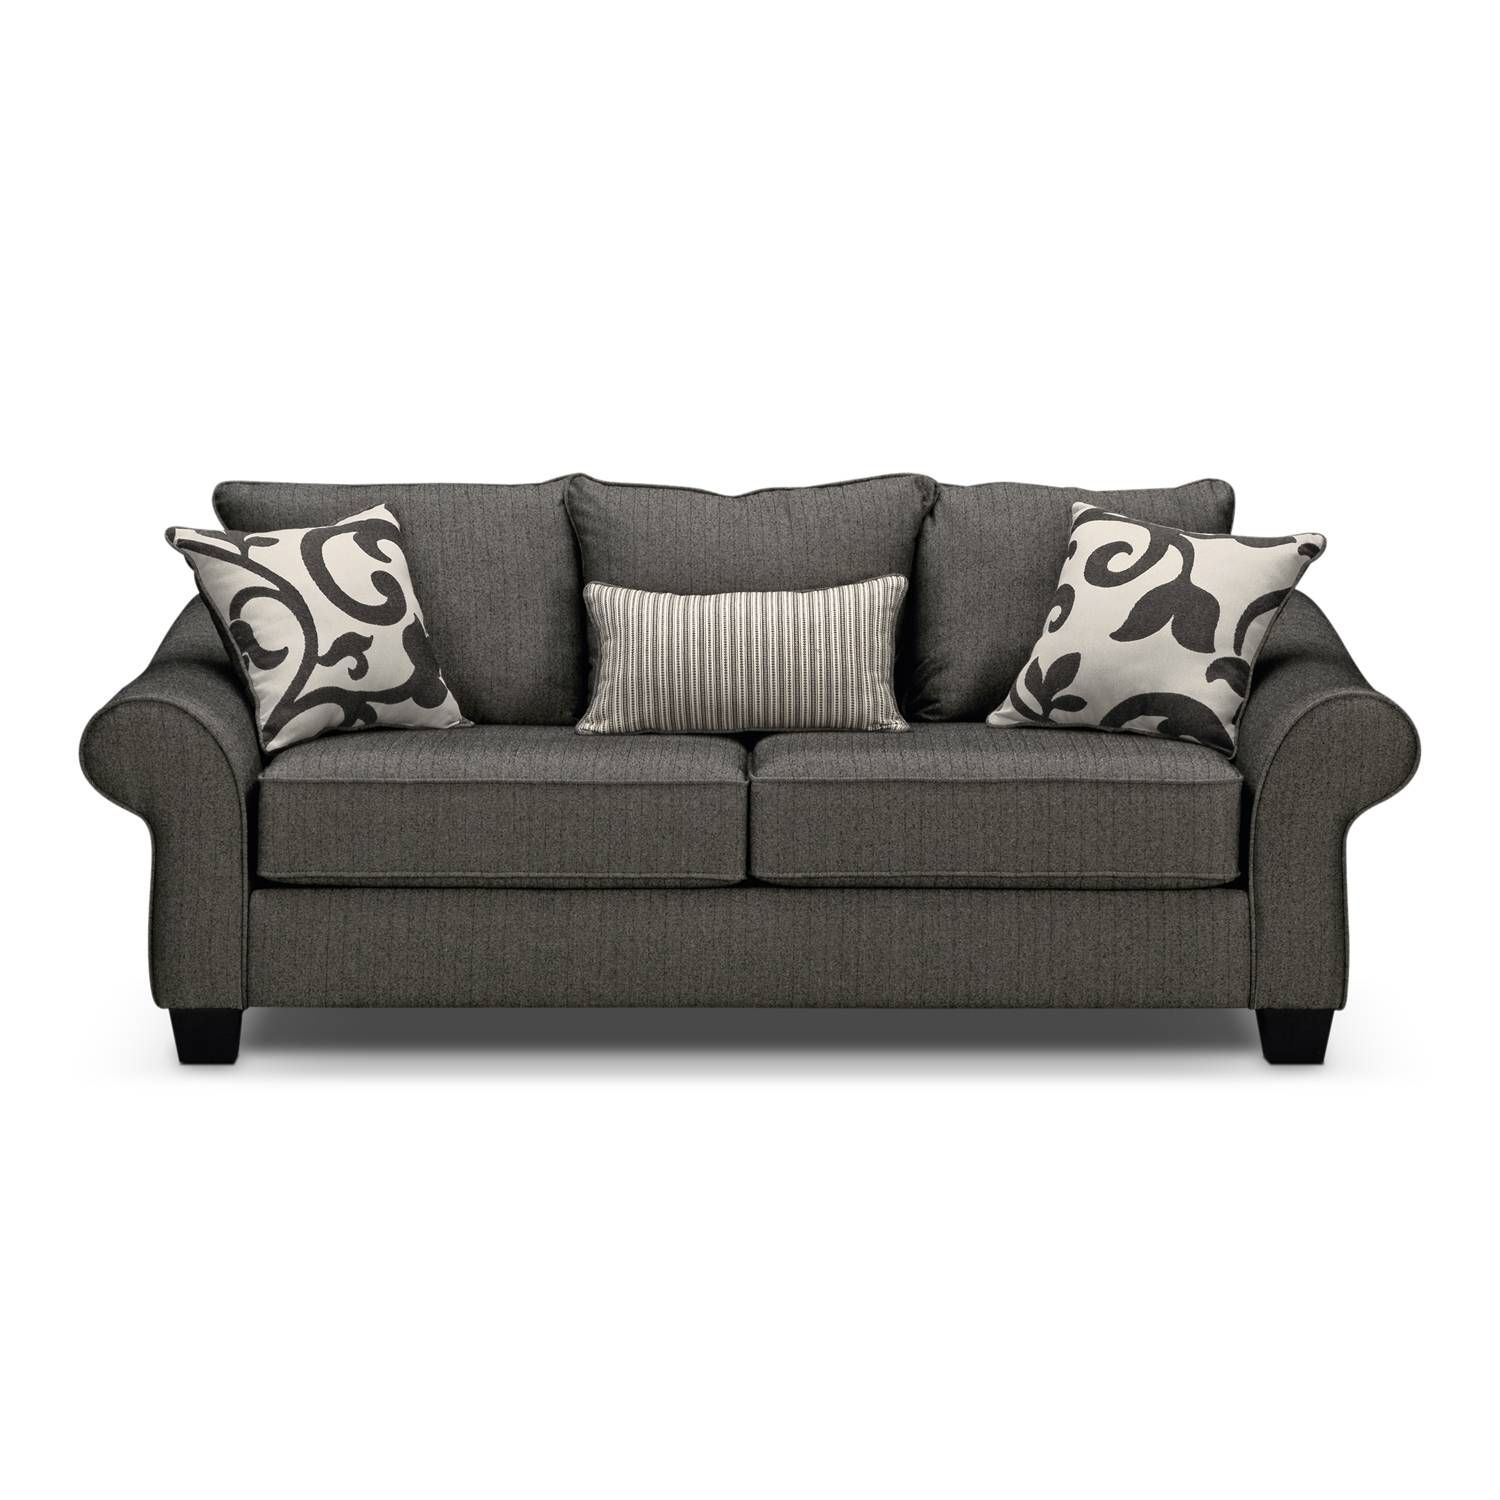 Sofas Center : Value City Furniture Sectional Sleepers Sofa Sale With Value City Sofas (View 8 of 25)